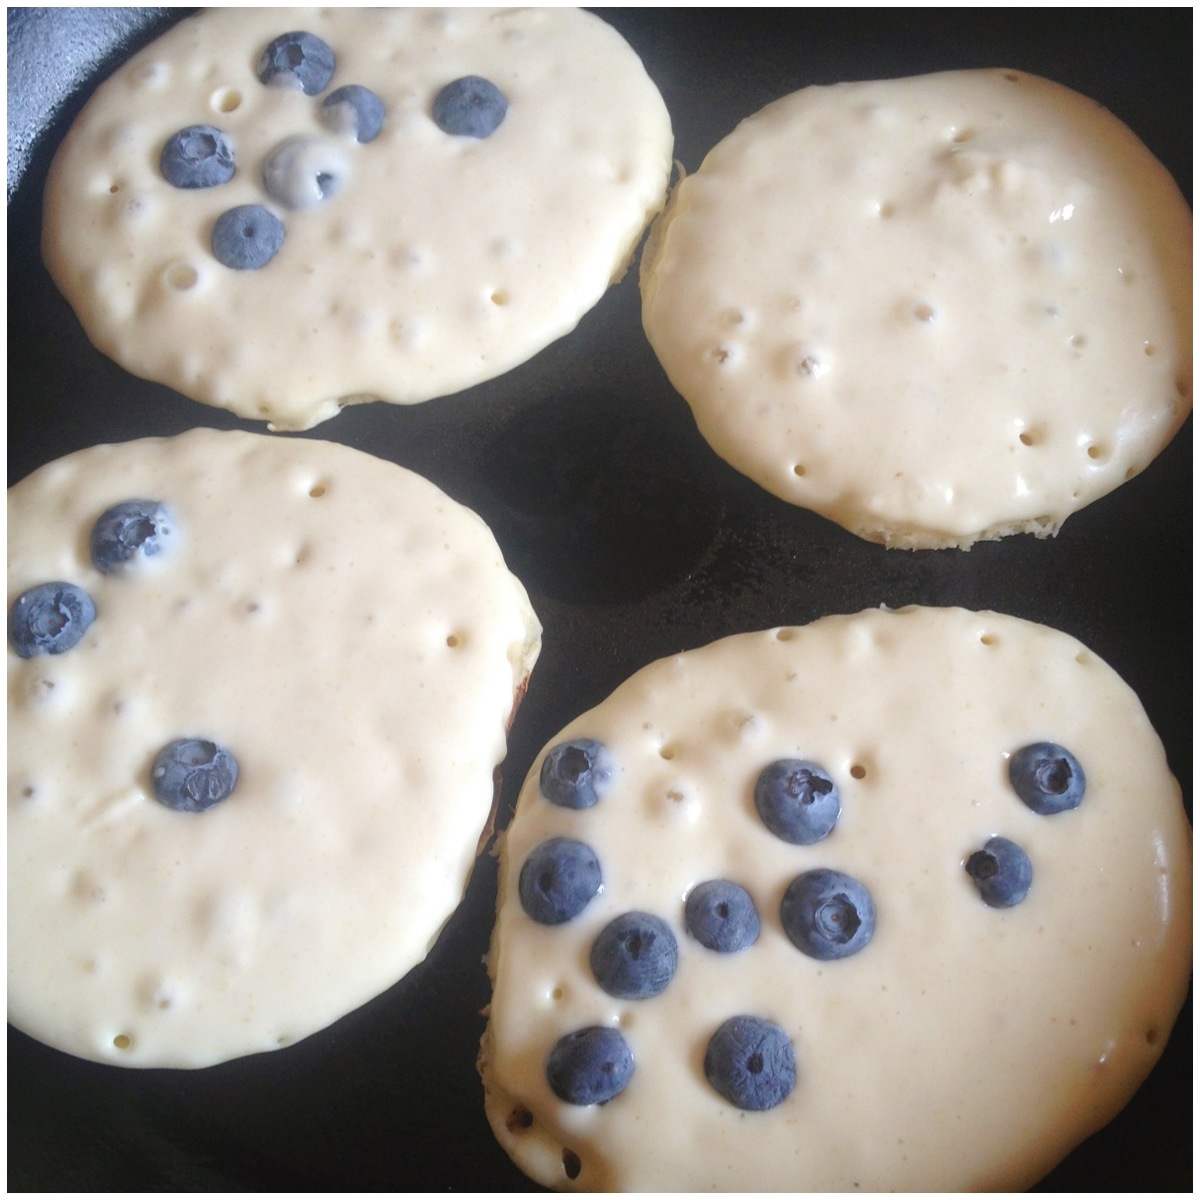 Blueberry make pancakes how with no to sugar pancakes thicker added  your